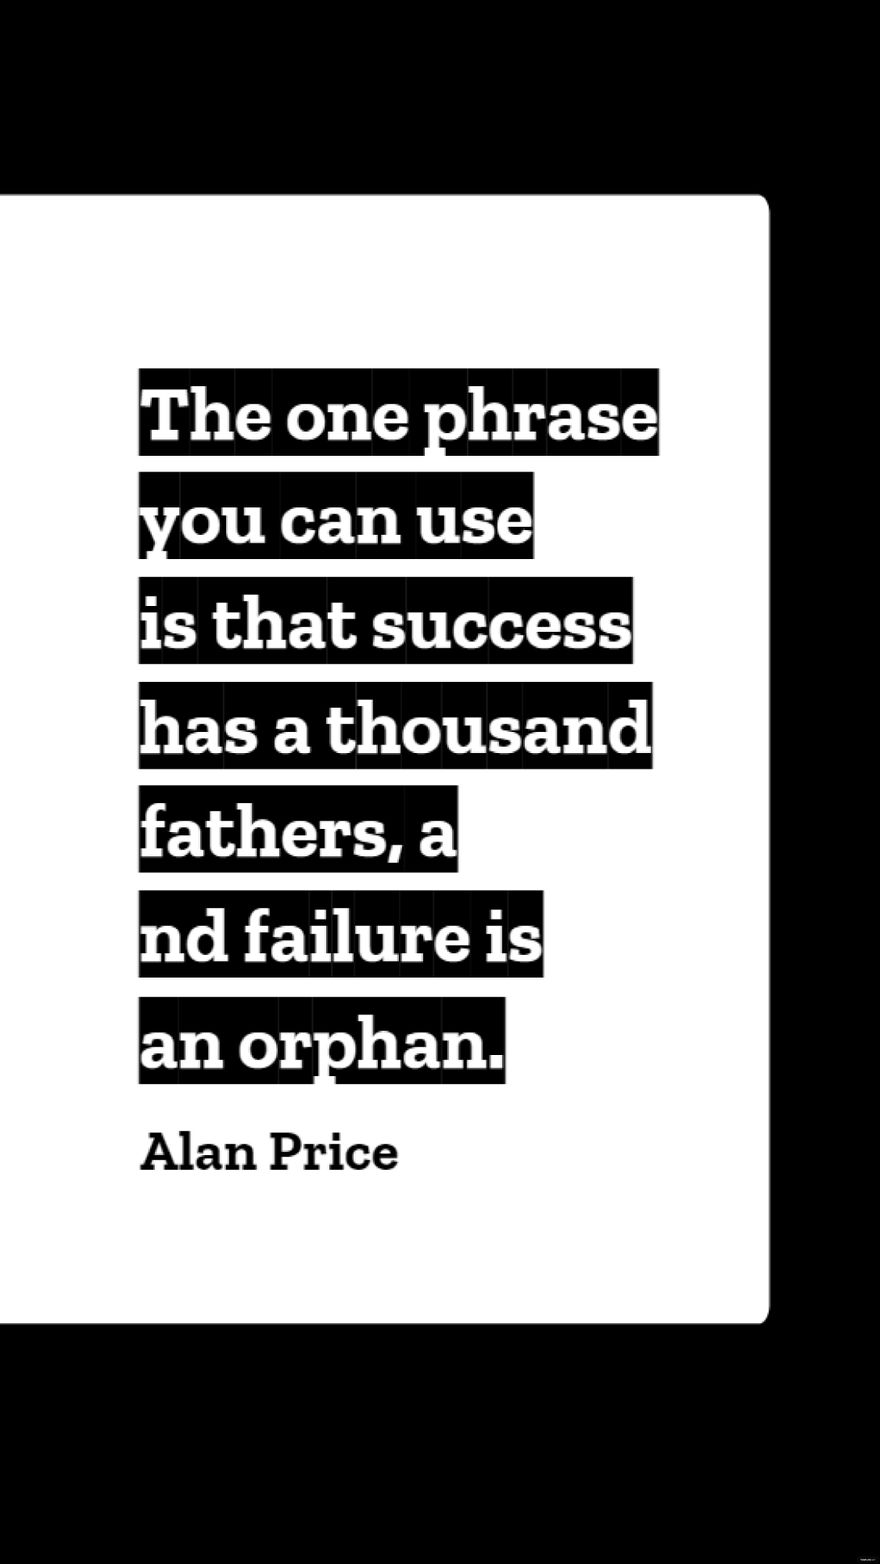 Alan Price - The one phrase you can use is that success has a thousand fathers, and failure is an orphan. in JPG